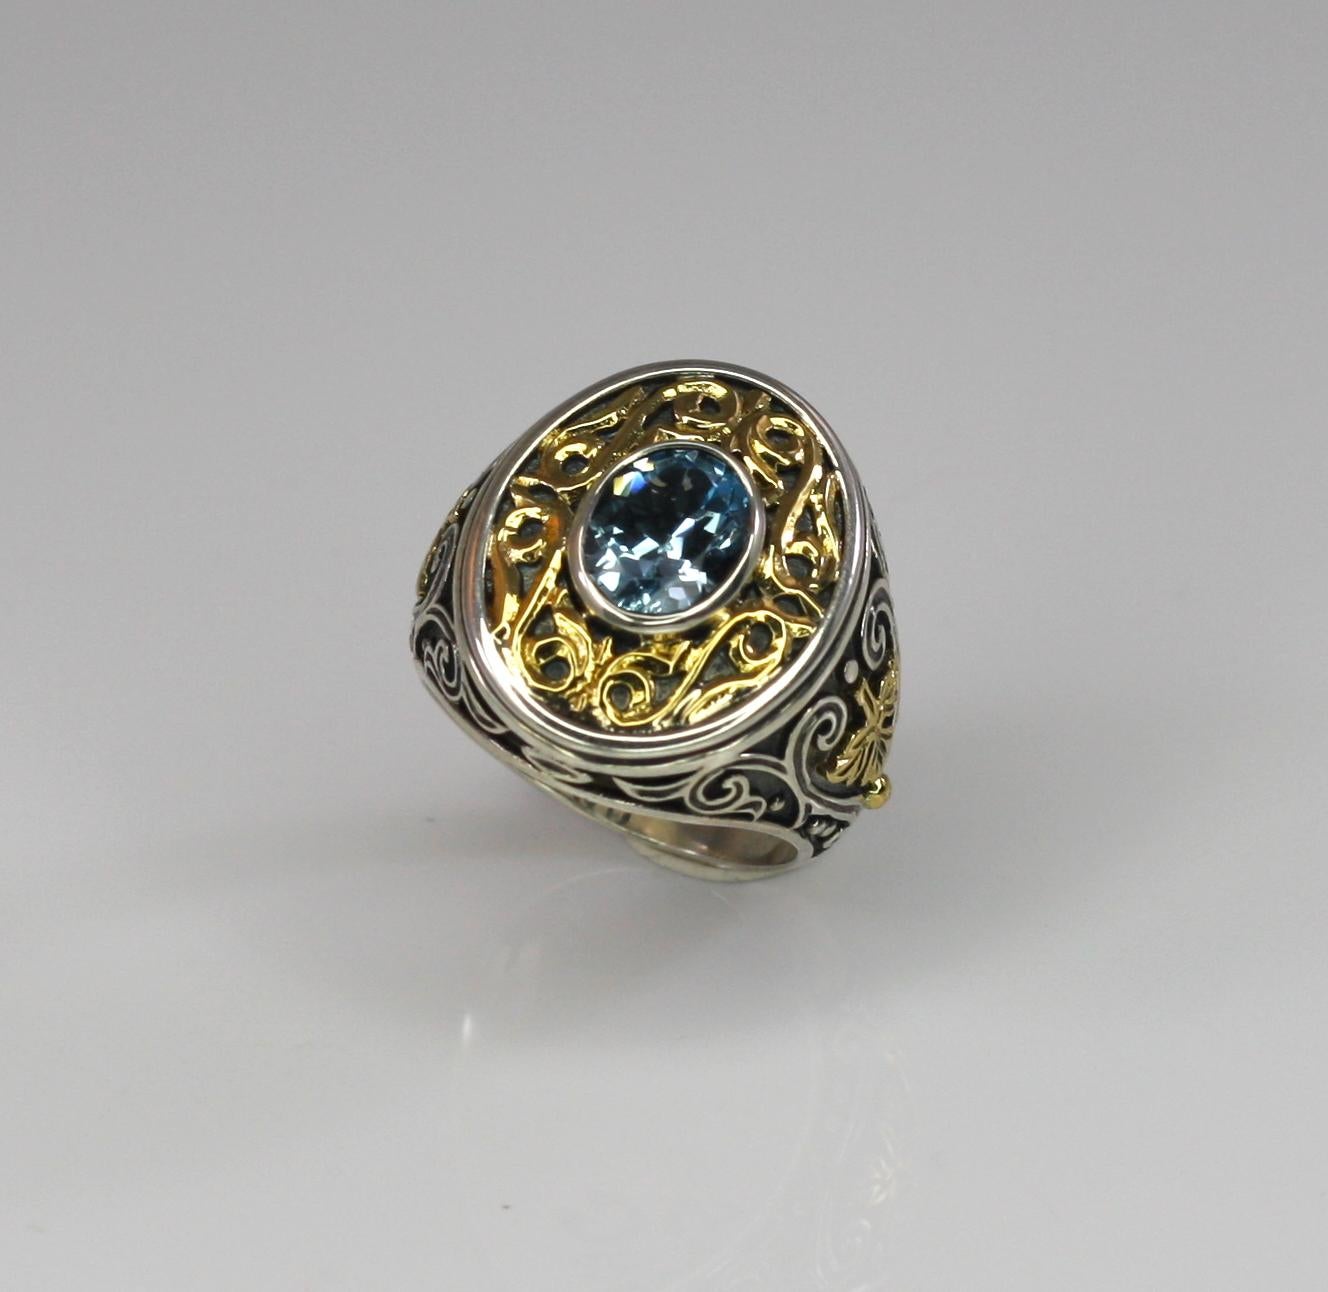 S.Georgios designer oval all handmade band ring, crafted from sterling silver and solid 18 Karat yellow gold inlay parts to create a unique look. This gorgeous art piece features a 3.80 Carat Blue Topaz. 
Please contact us for this design in a